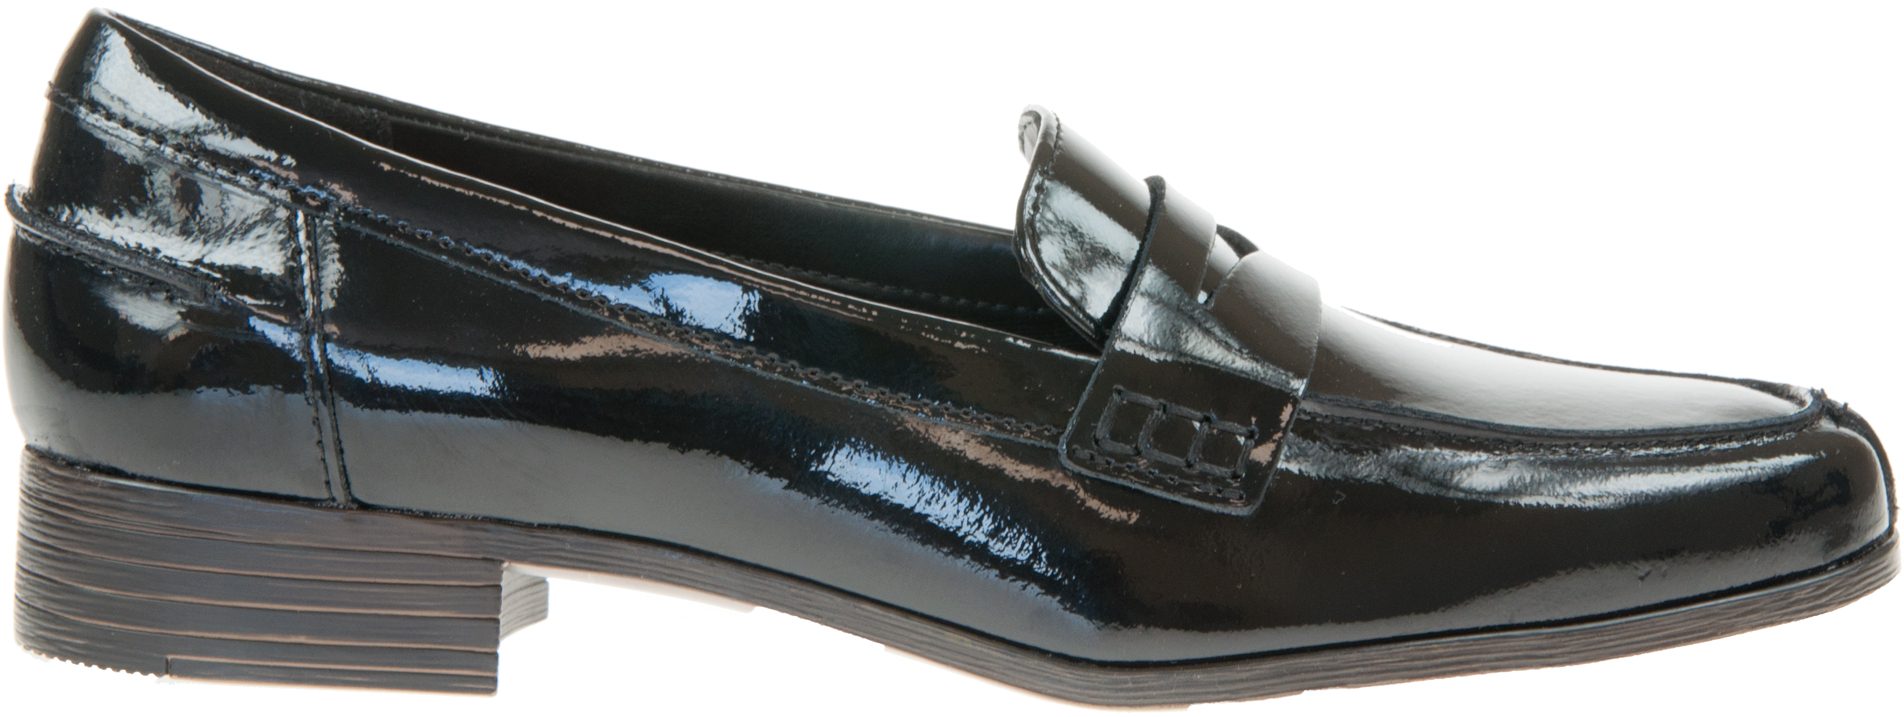 Clarks Hamble Loafer Black Patent 26147536 - Loafers & Moccasins ...